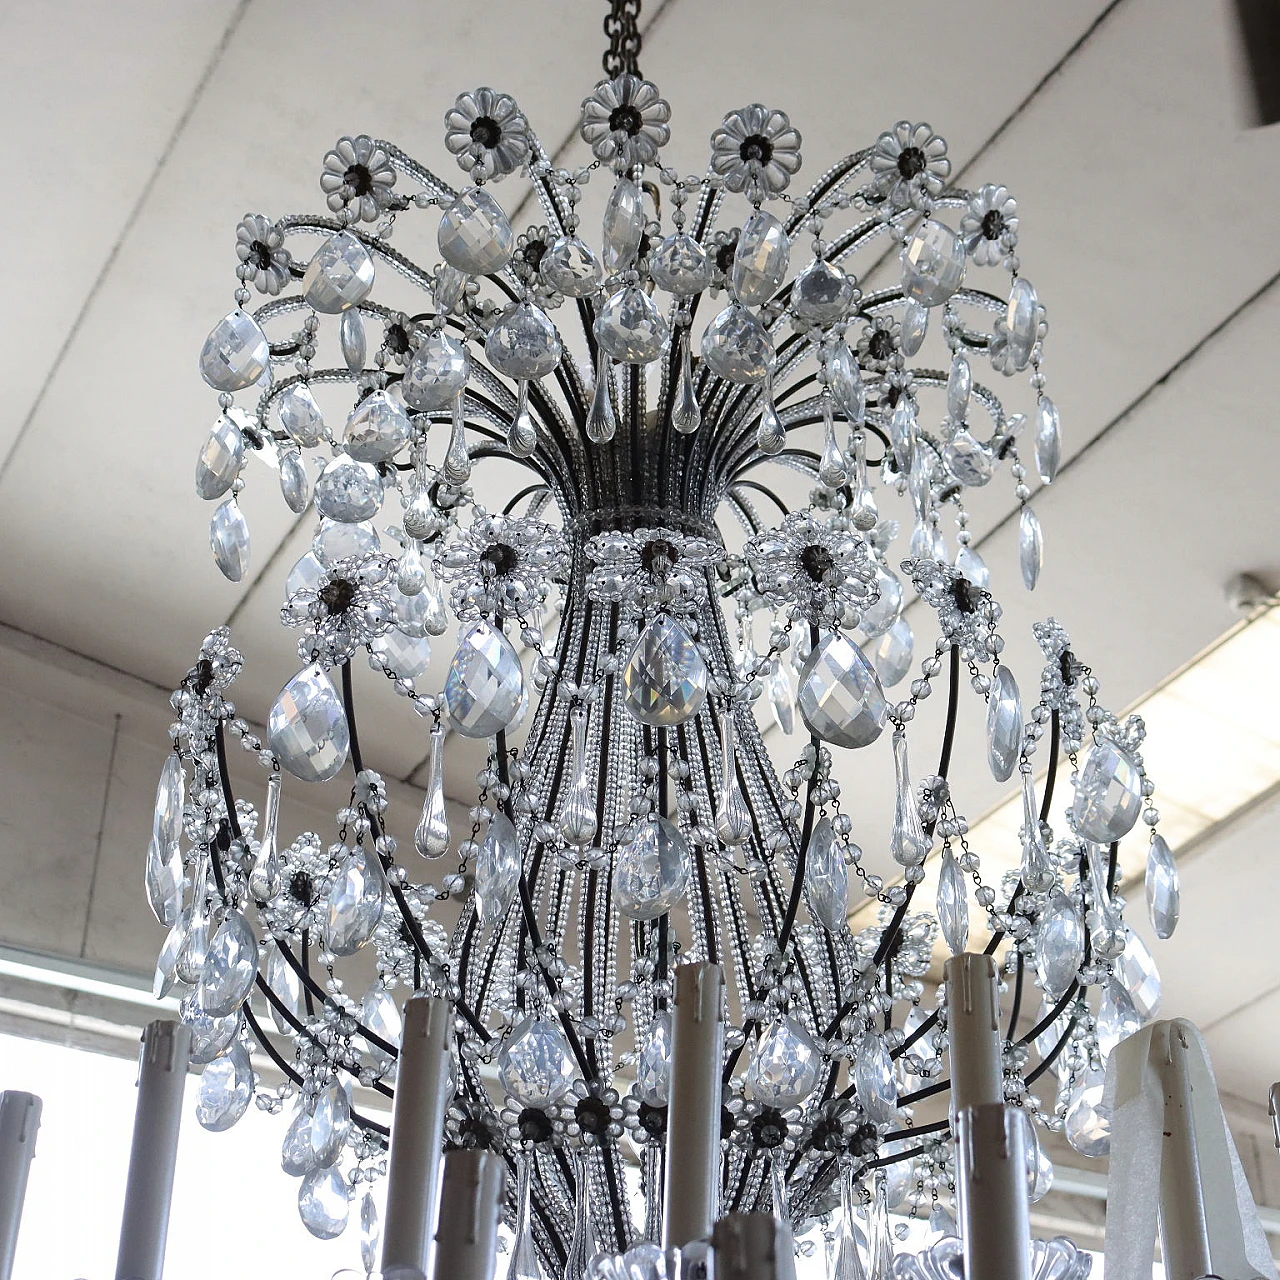 Three-stage chandelier in metal, glass and crystal 7